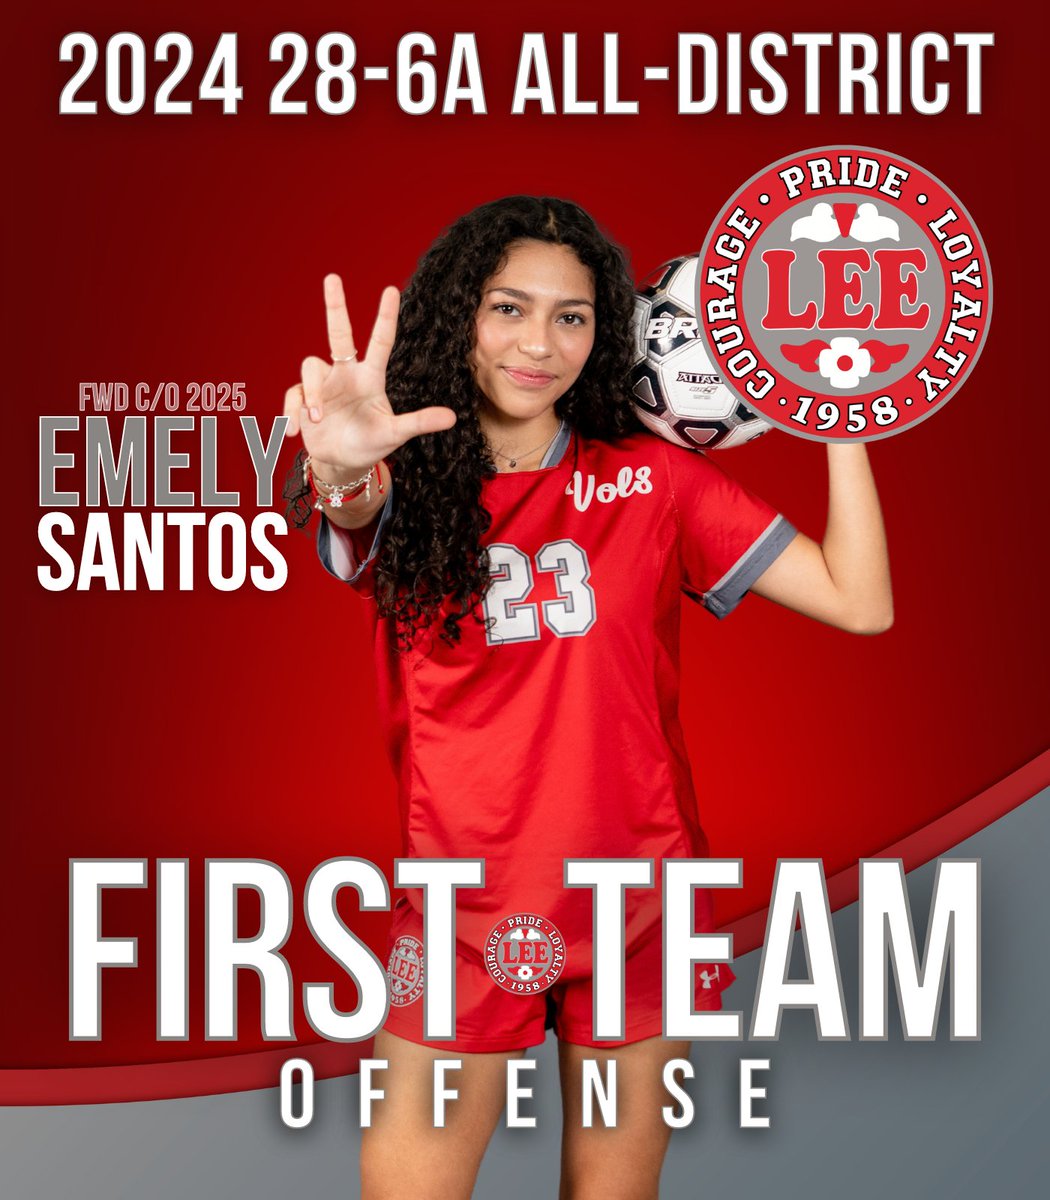 Congratulations to Junior Forward, Emely Santos, for being selected to the 2024 28-6A All-District First Team! #GoVols